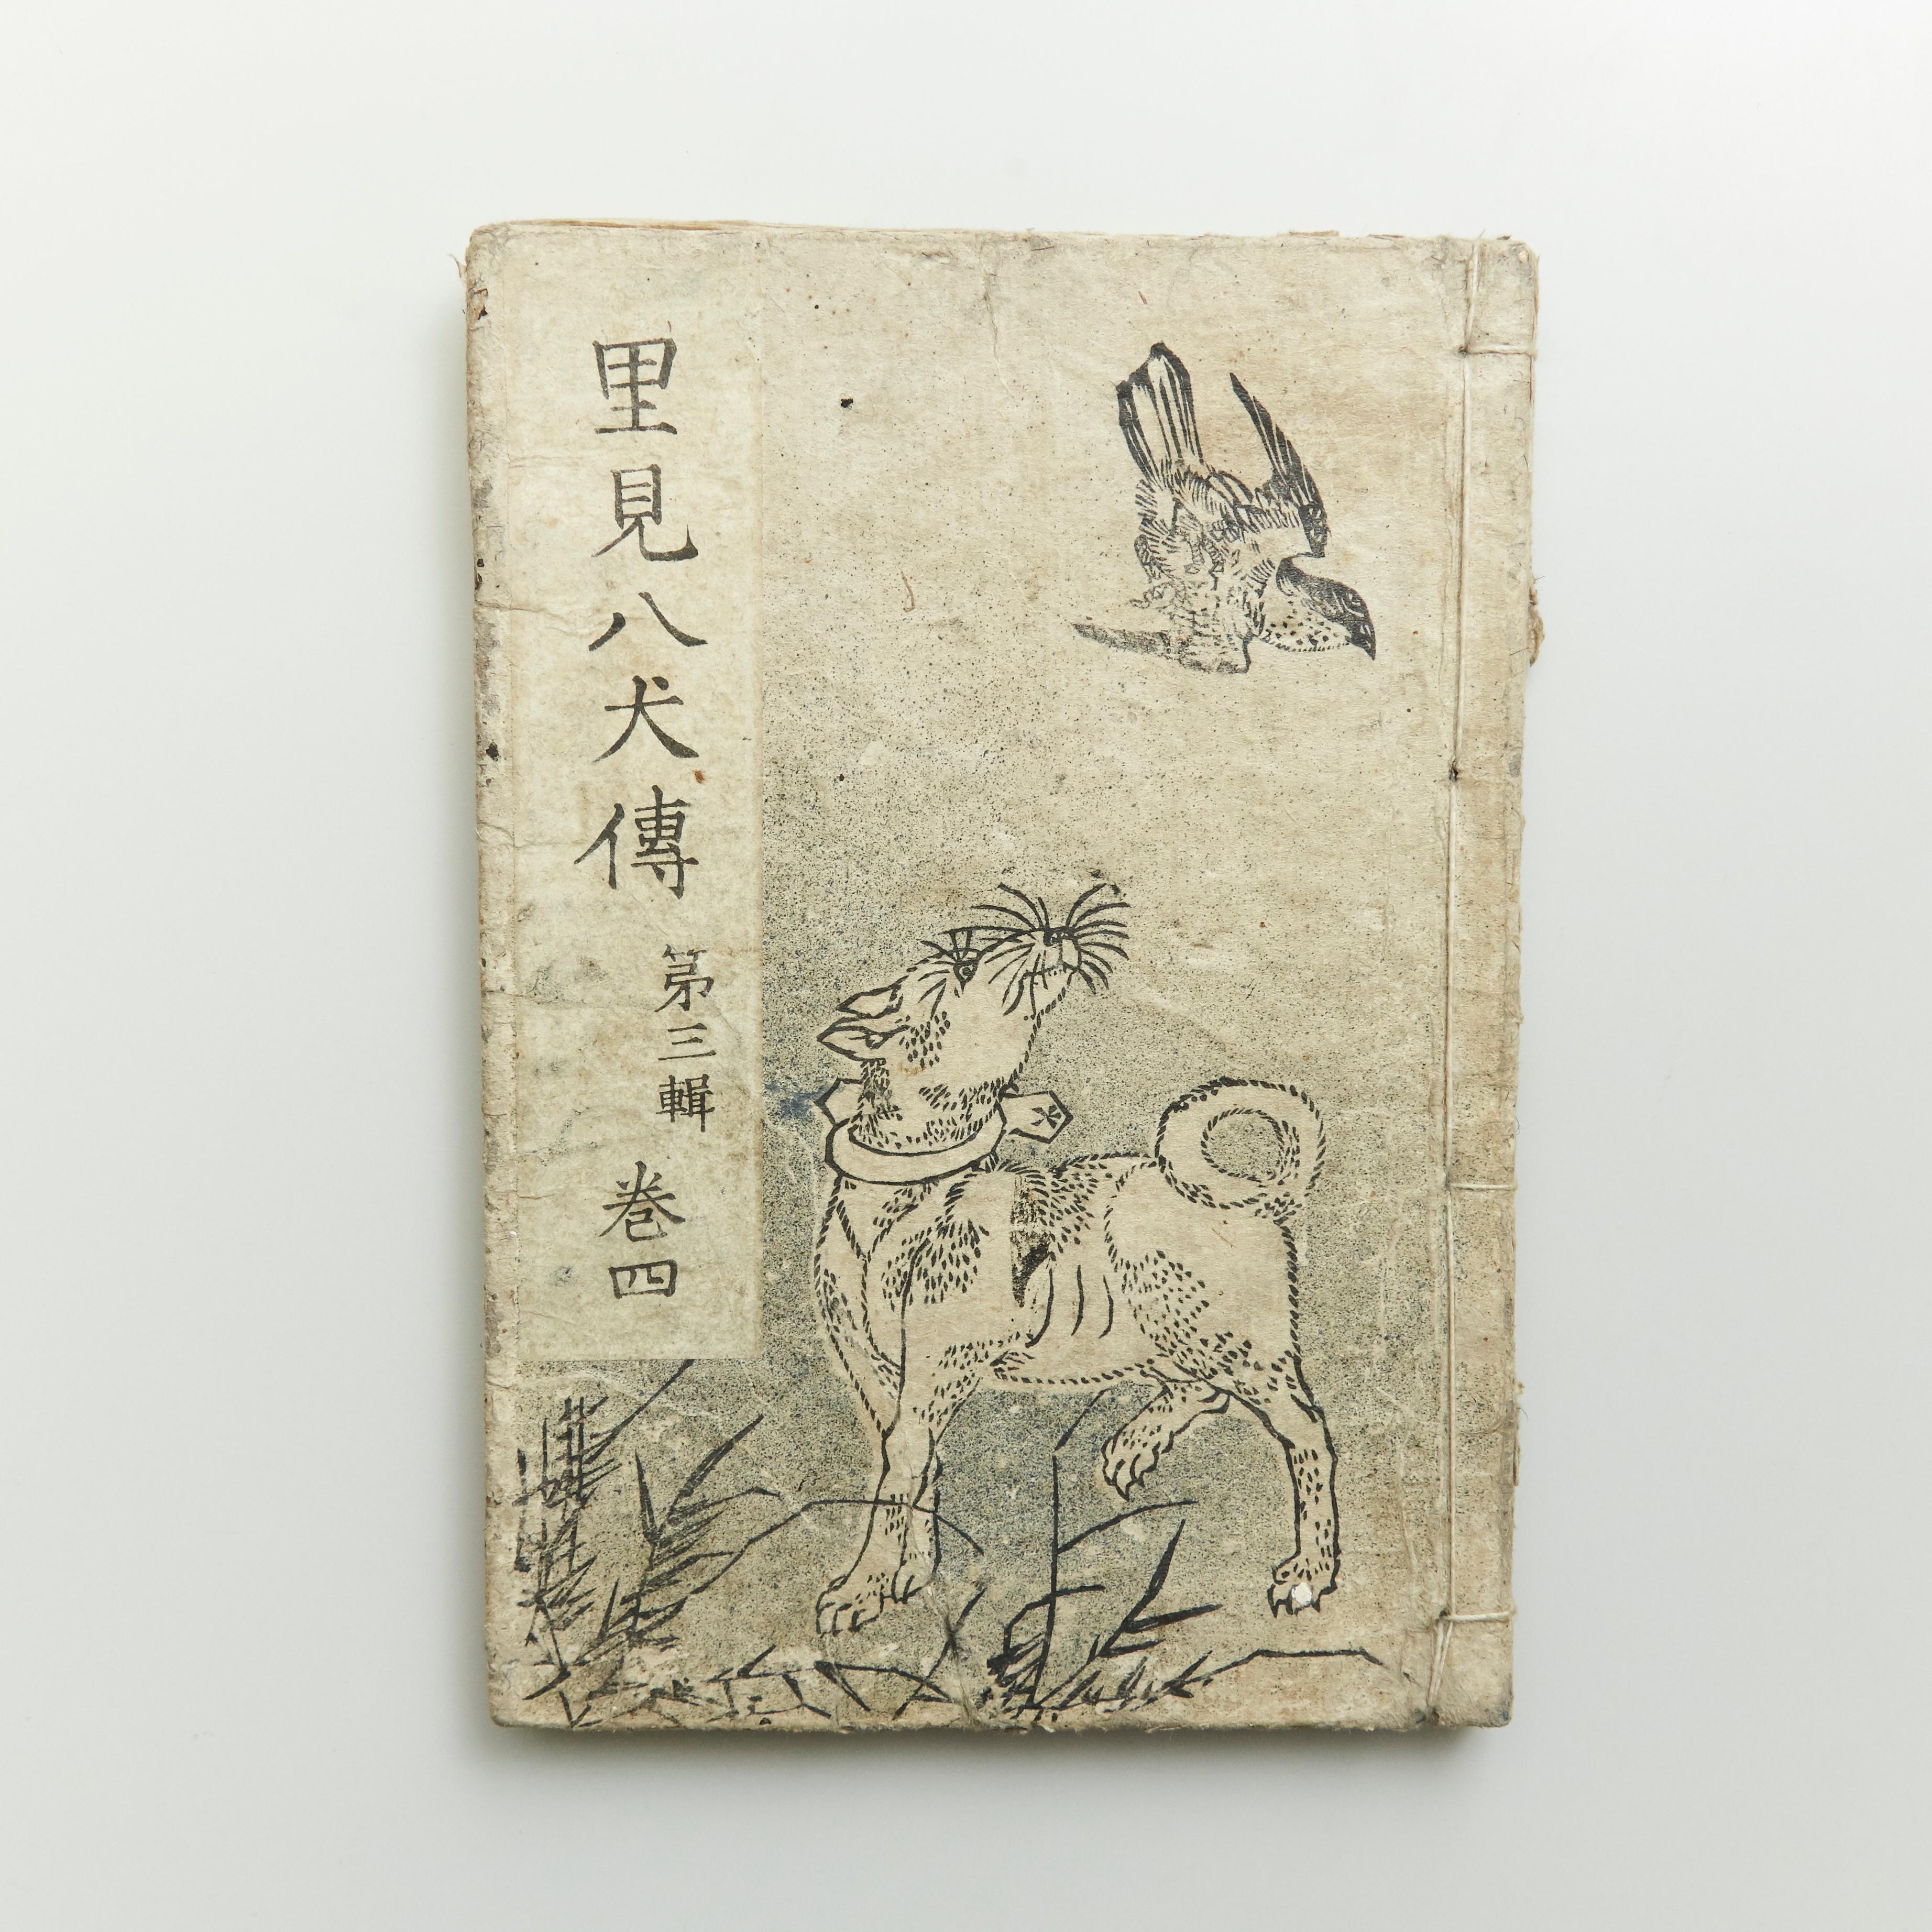 Antique Japanese epic novel book Edo period, circa 1819
Woodblock print book

Book dimensions: 223 mm x 155 mm

There are damages because it is antique item as we show on the photos.
  